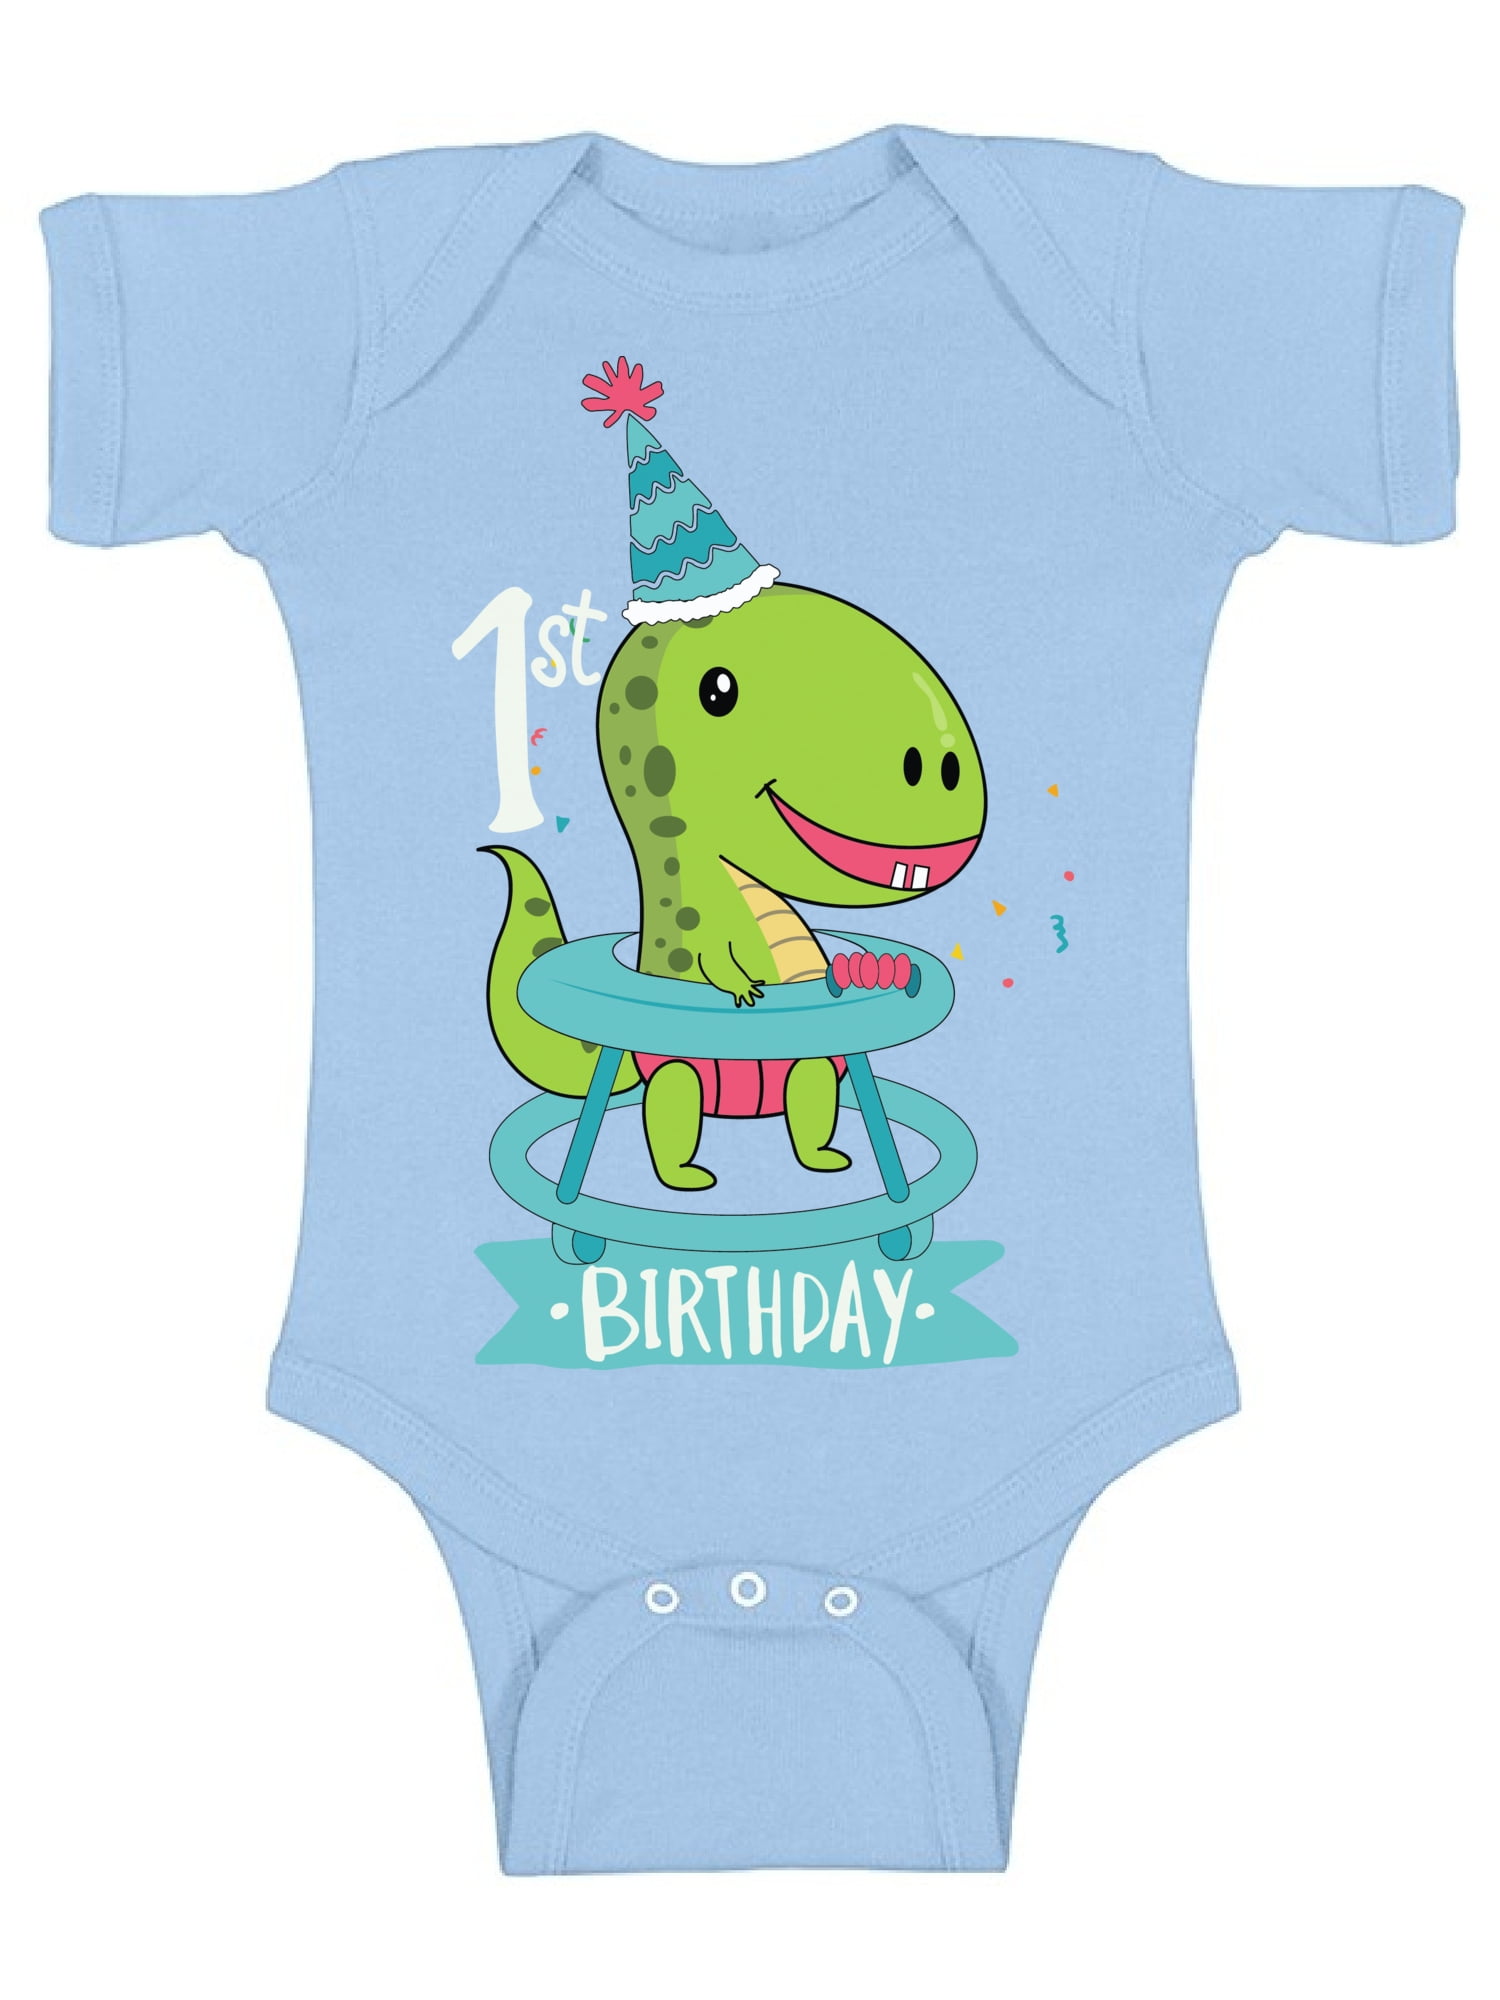 16 Best Gift Ideas for One Year Old Twin Boys - Fresh Mommy Blog